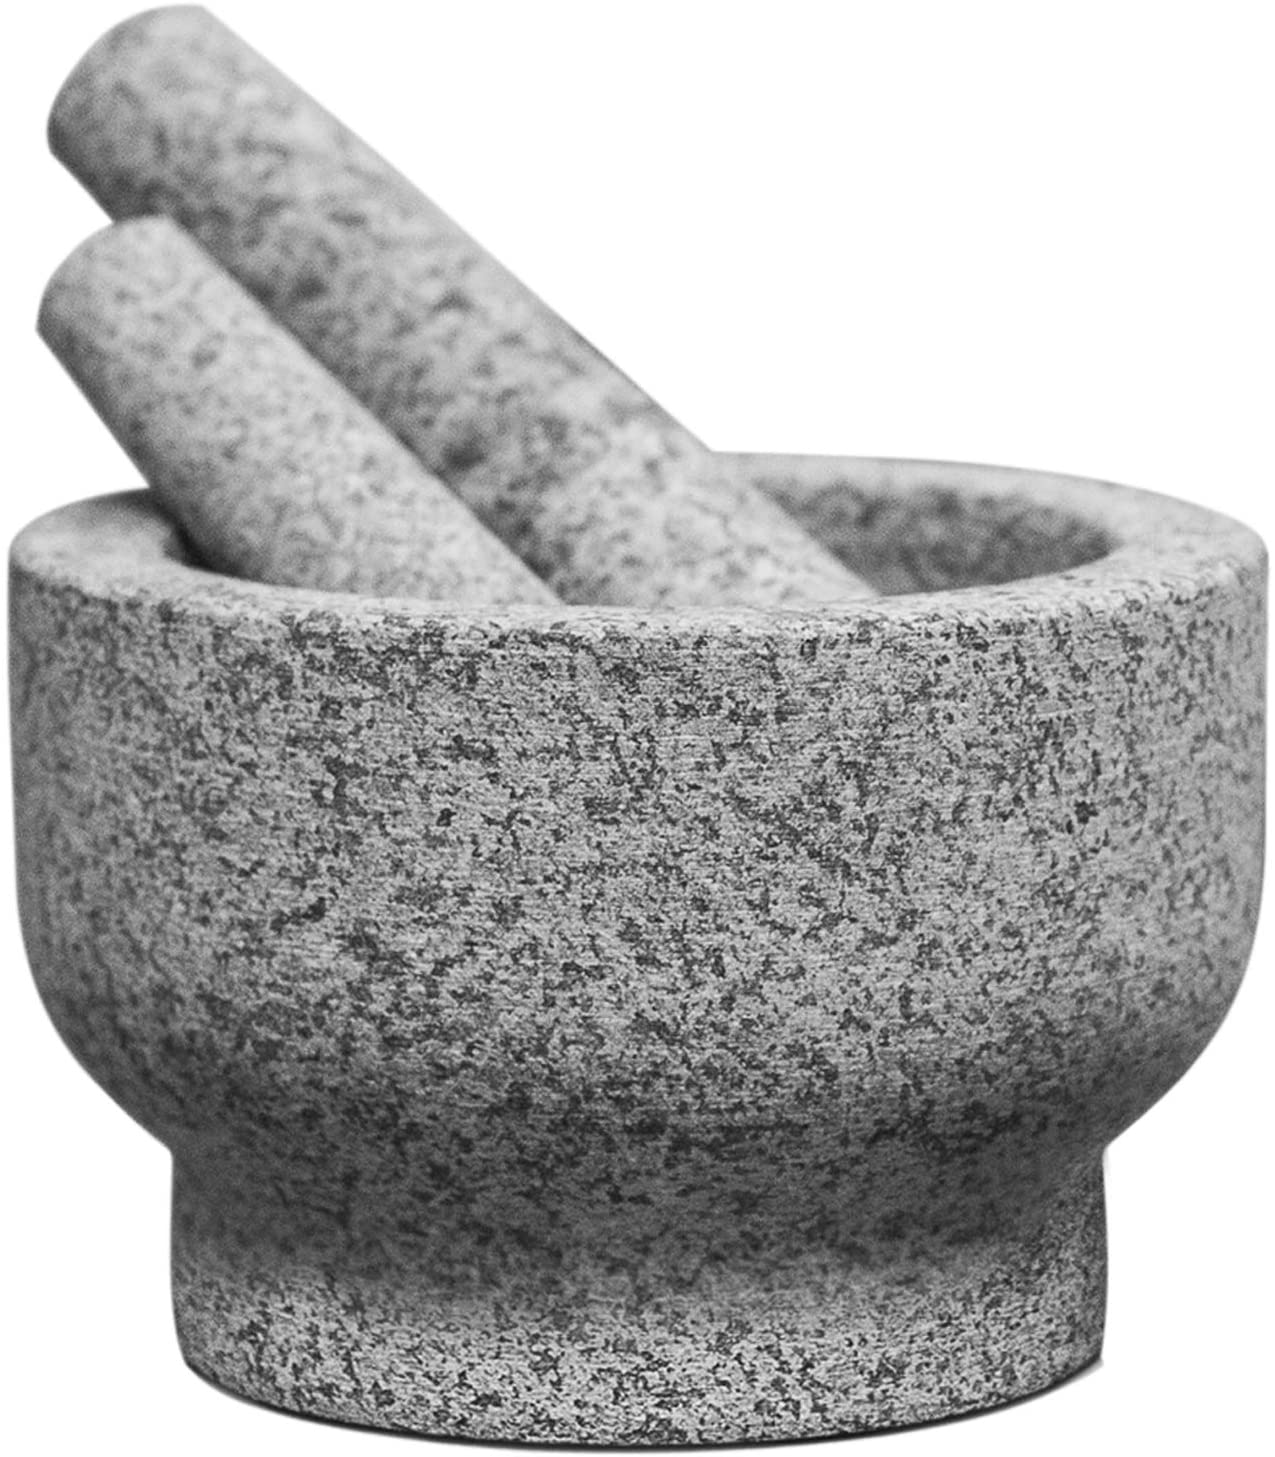 ChefSofi Extra Large 8 Inch 5 Cup-Capacity Mortar and Pestle Set - Black  Polished Exterior - One Huge Mortar and Two Pestels: 8.5 inch and 6.5 inch